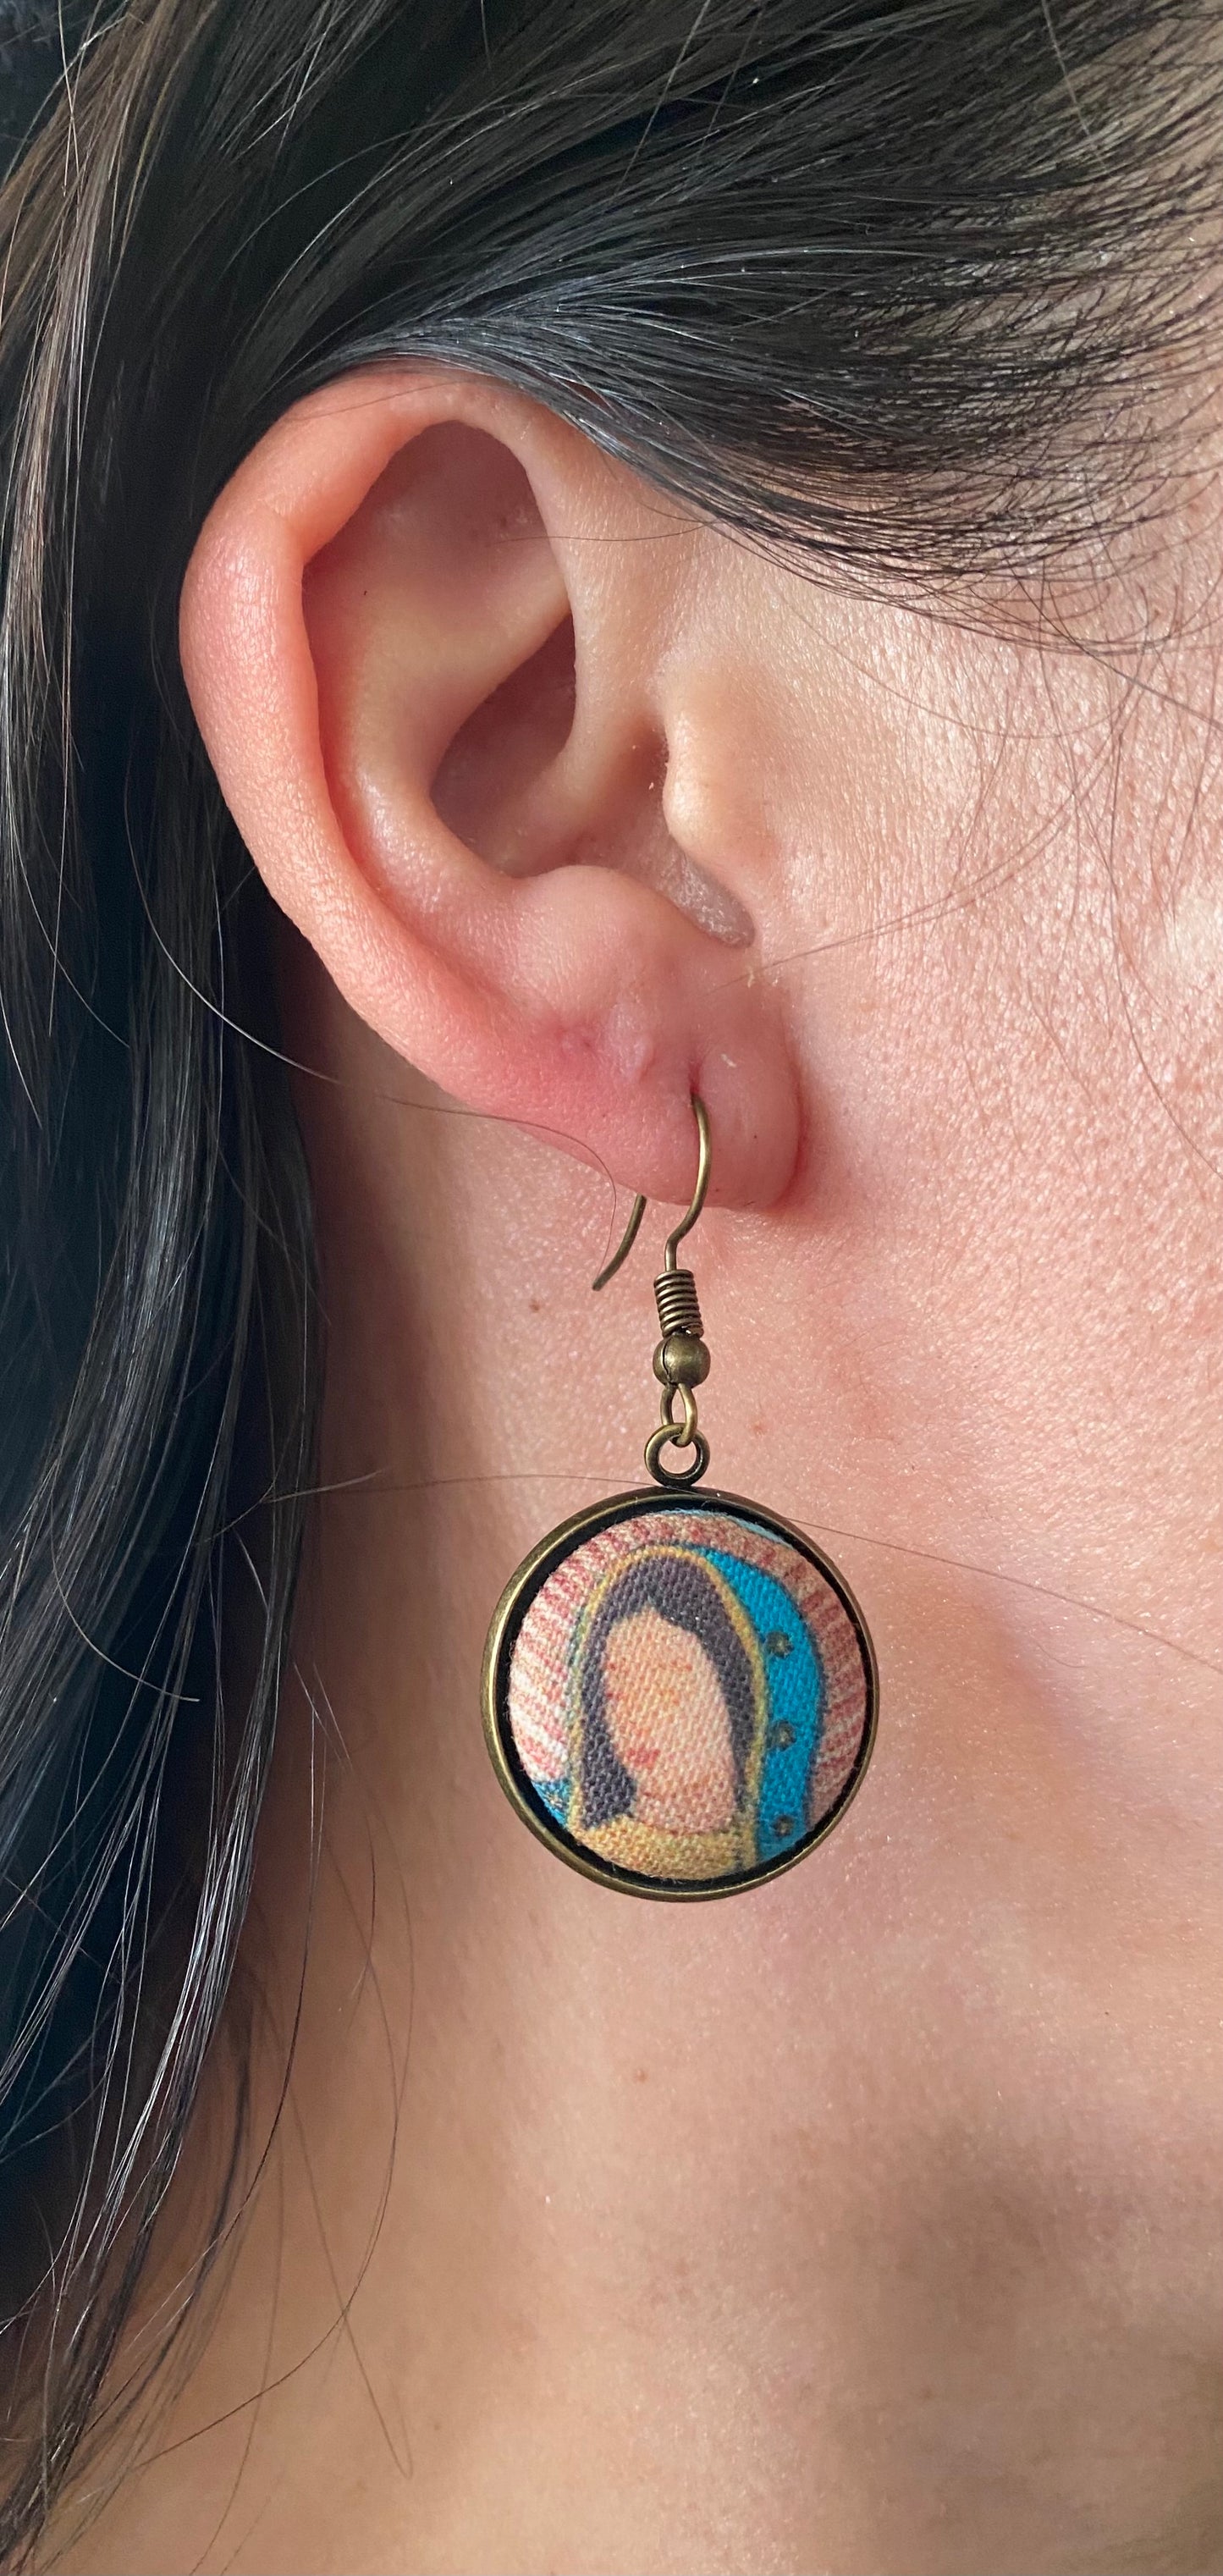 Lady Guadalupe Virgin Mary earrings gift